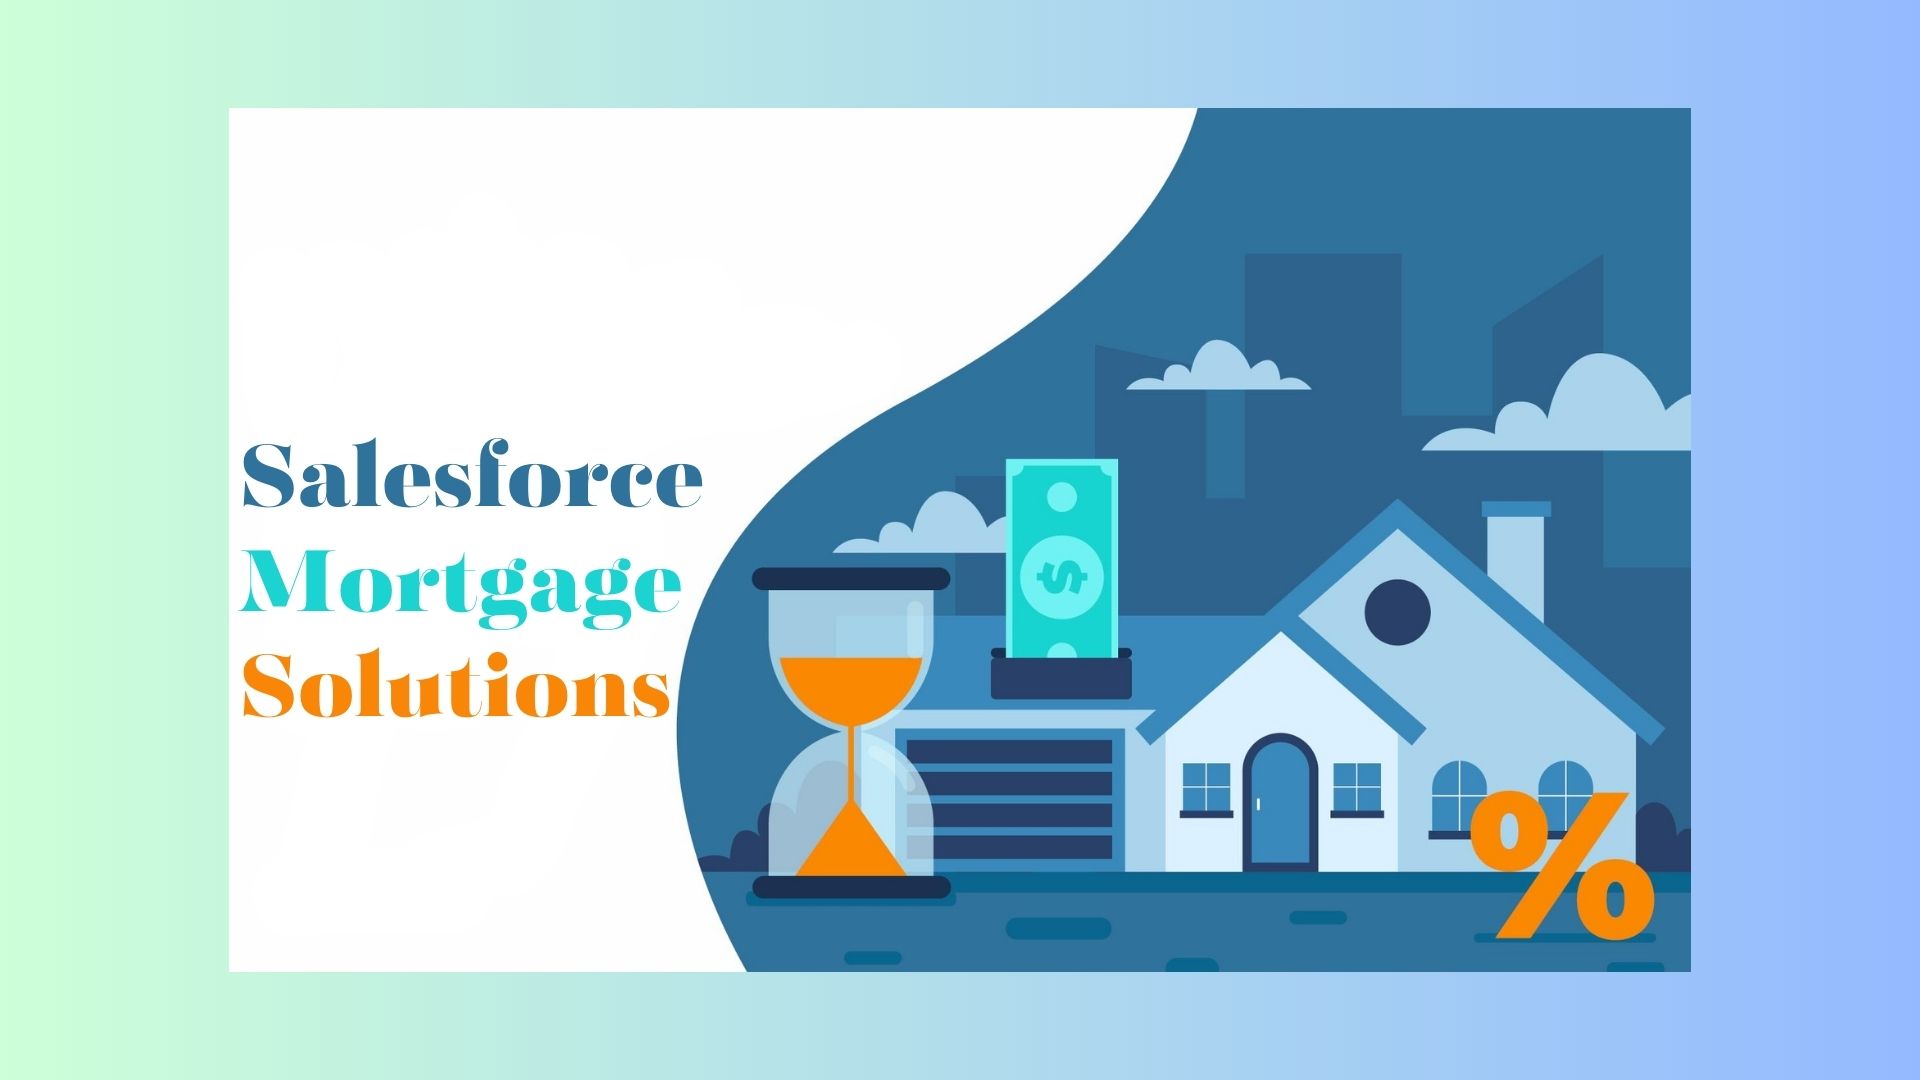 Salesforce Mortgage Solutions: Revolutionizing Lending Practices